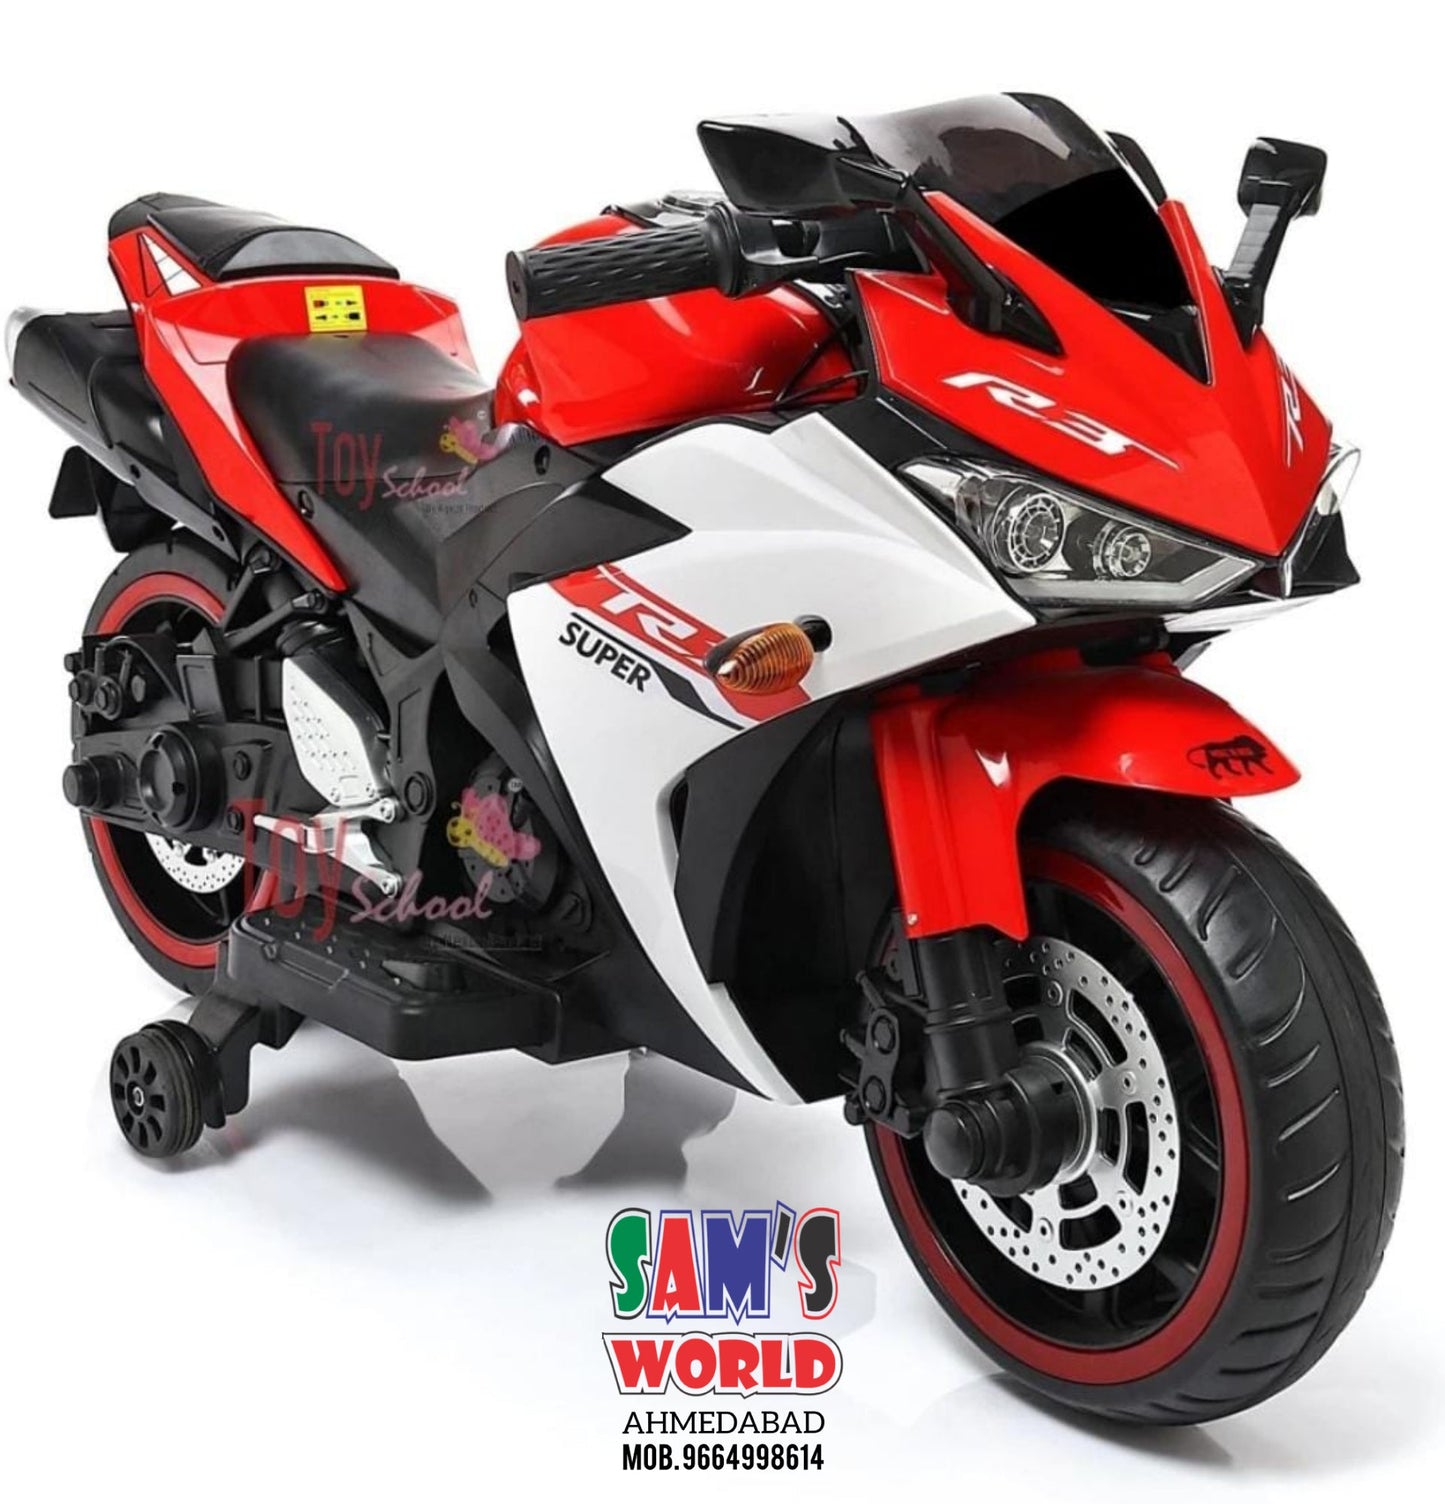 R3 Battery Operated Ride On Recharge Bike For Kids Children Toy Electric Kids Motorcycle | sams toy world FUN N FUNKY Sams toy world Ahmedabad 